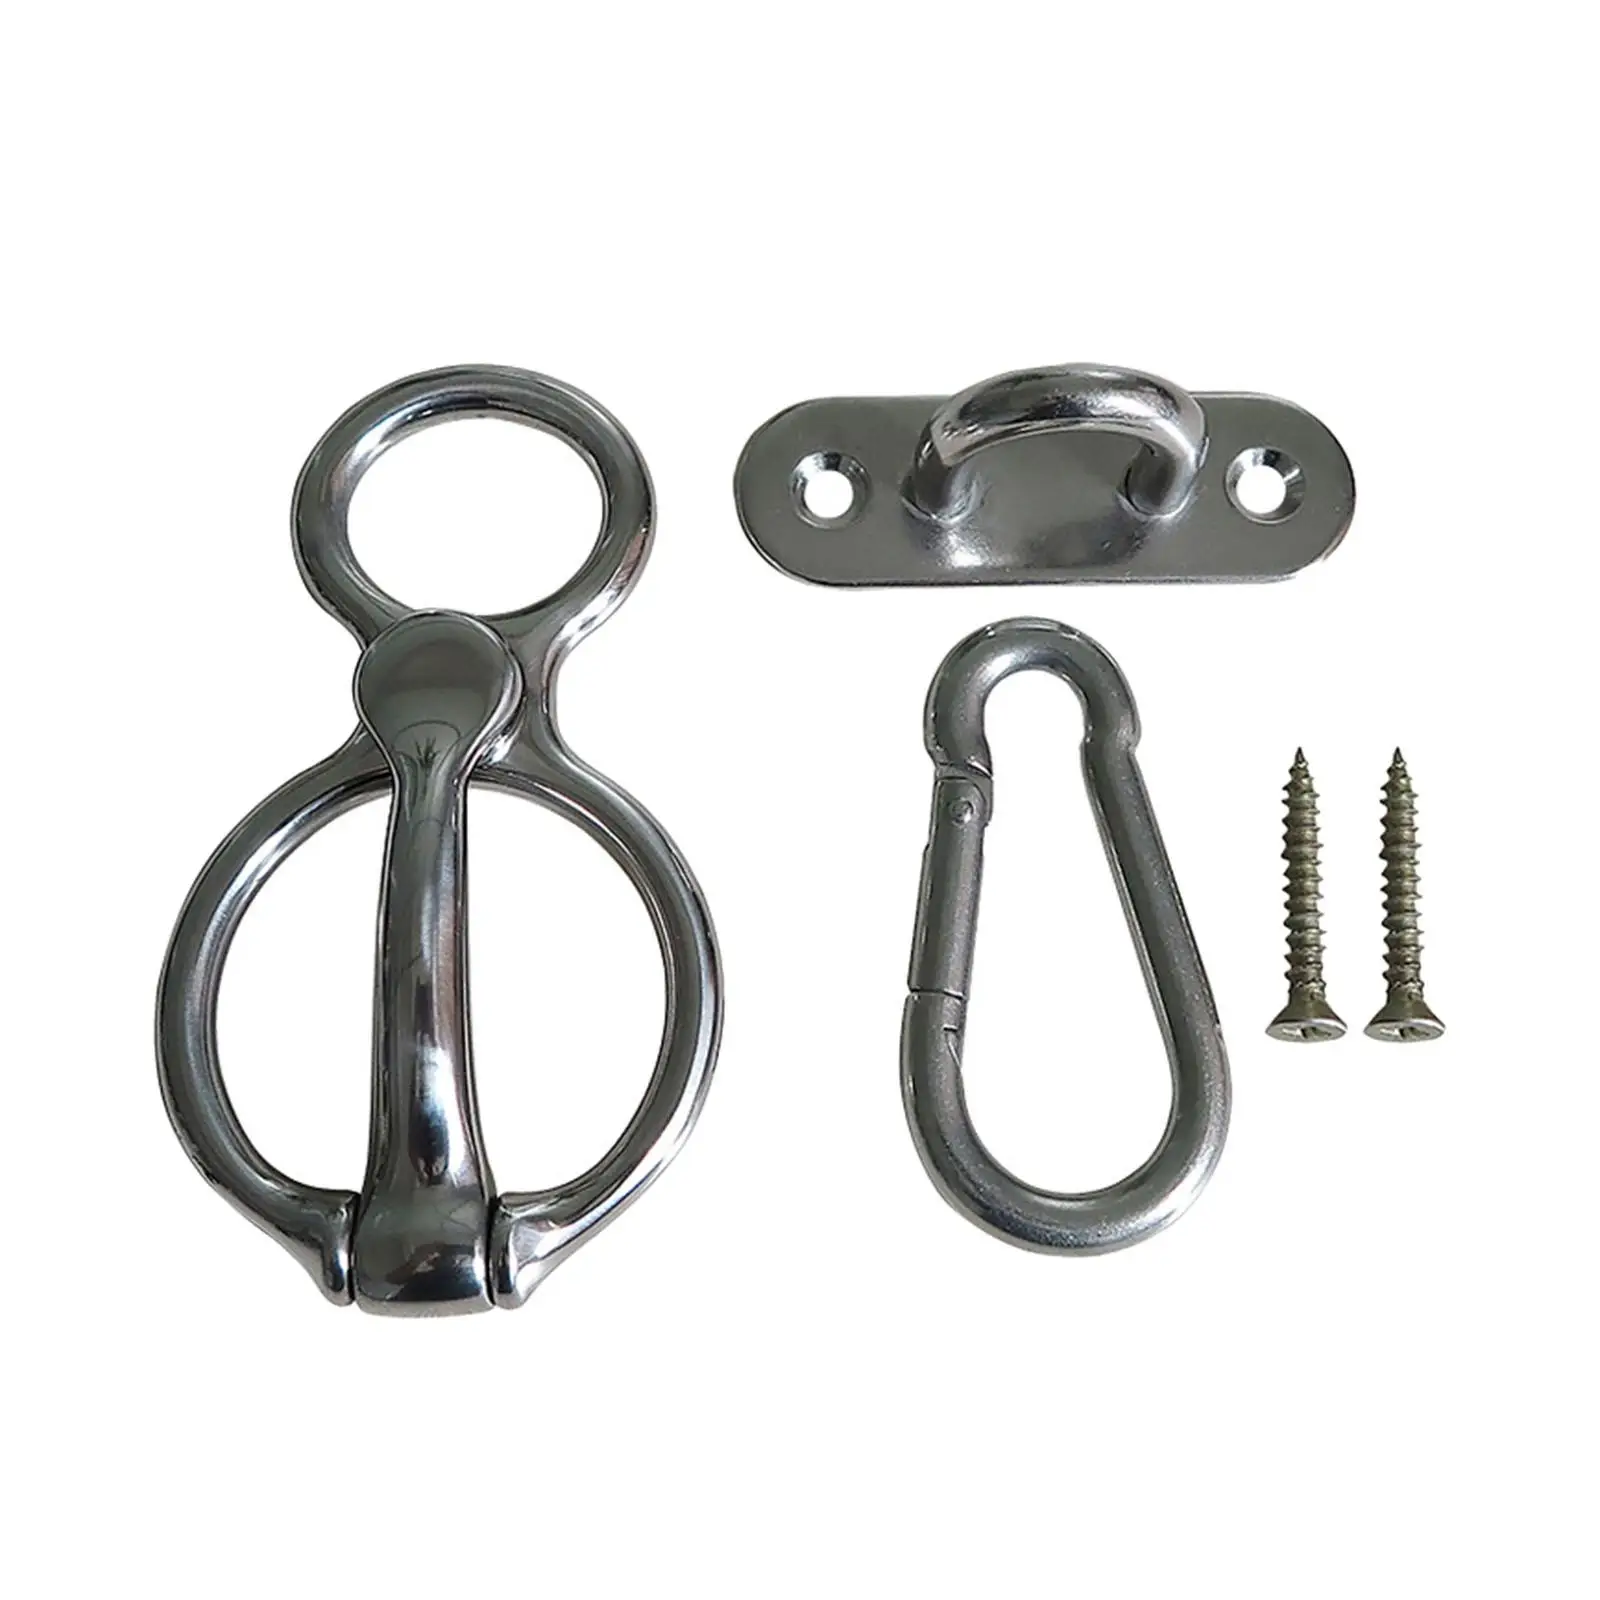 Horse Tie Ring Prevent Horses from Pulling Back Outdoor Sports Hooks Horse Tack Supplies Training Equipment Safety Accessories